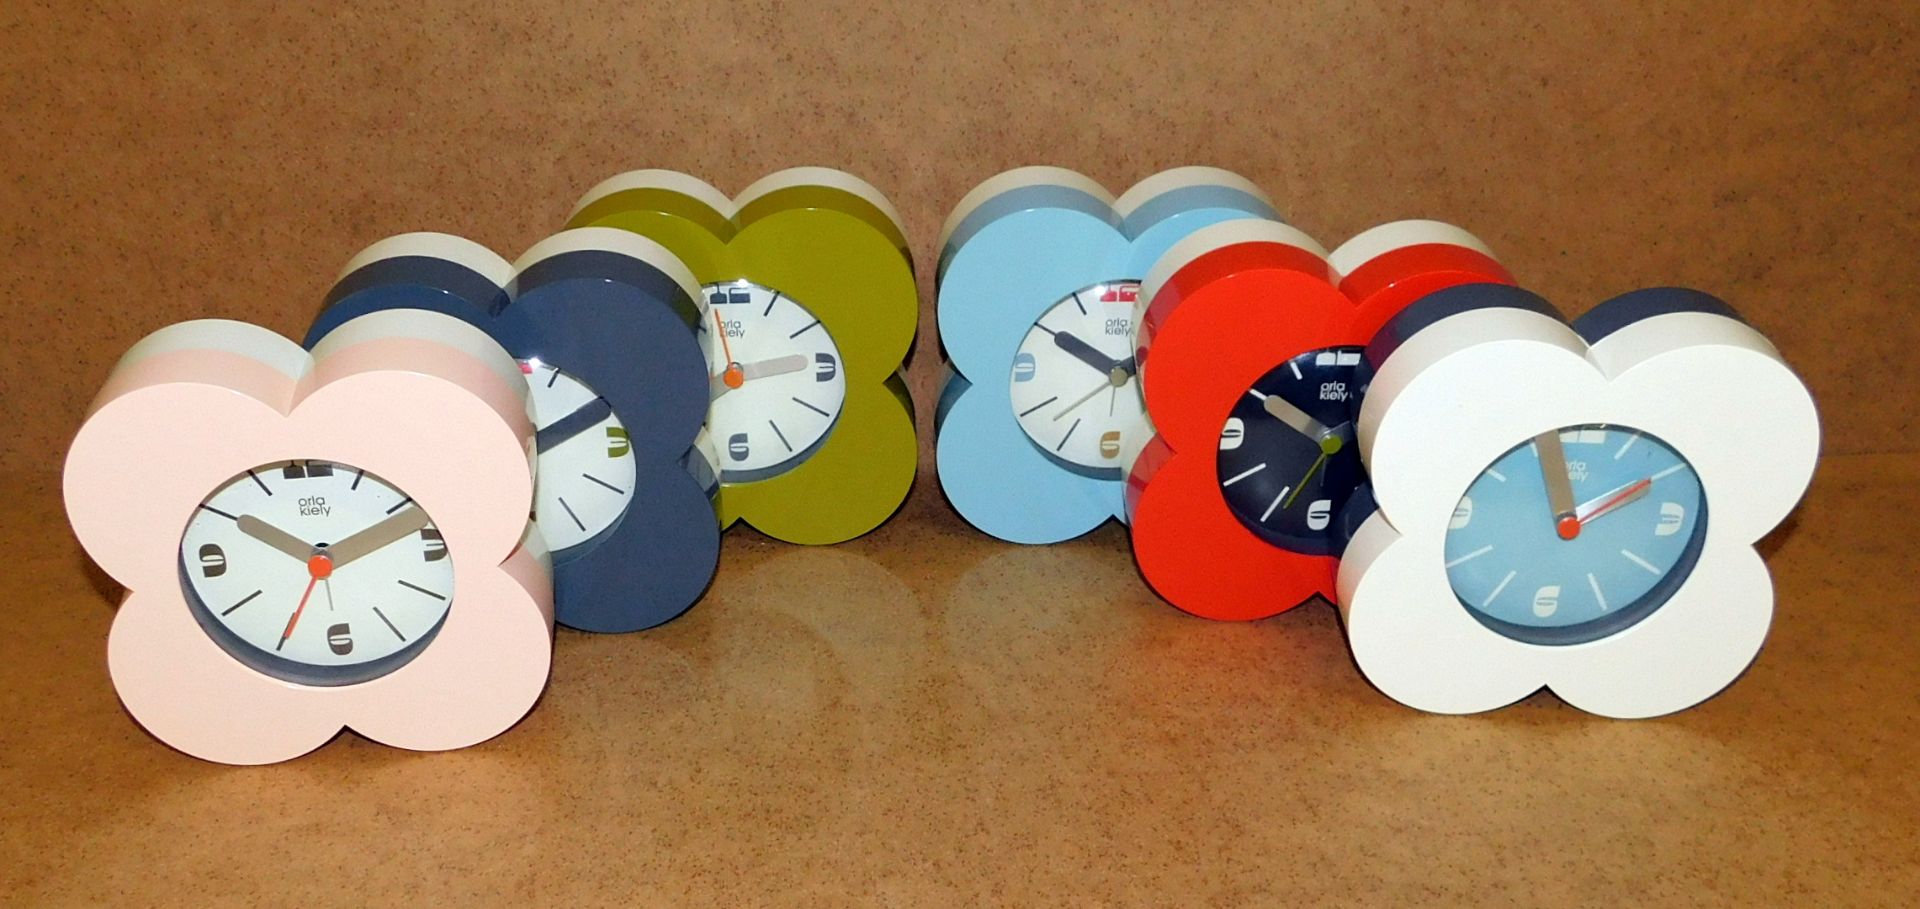 6 Orla Kiely Clocks, Grey/Pink/Olive/Red/White/Blue (RRP £39.95 each)